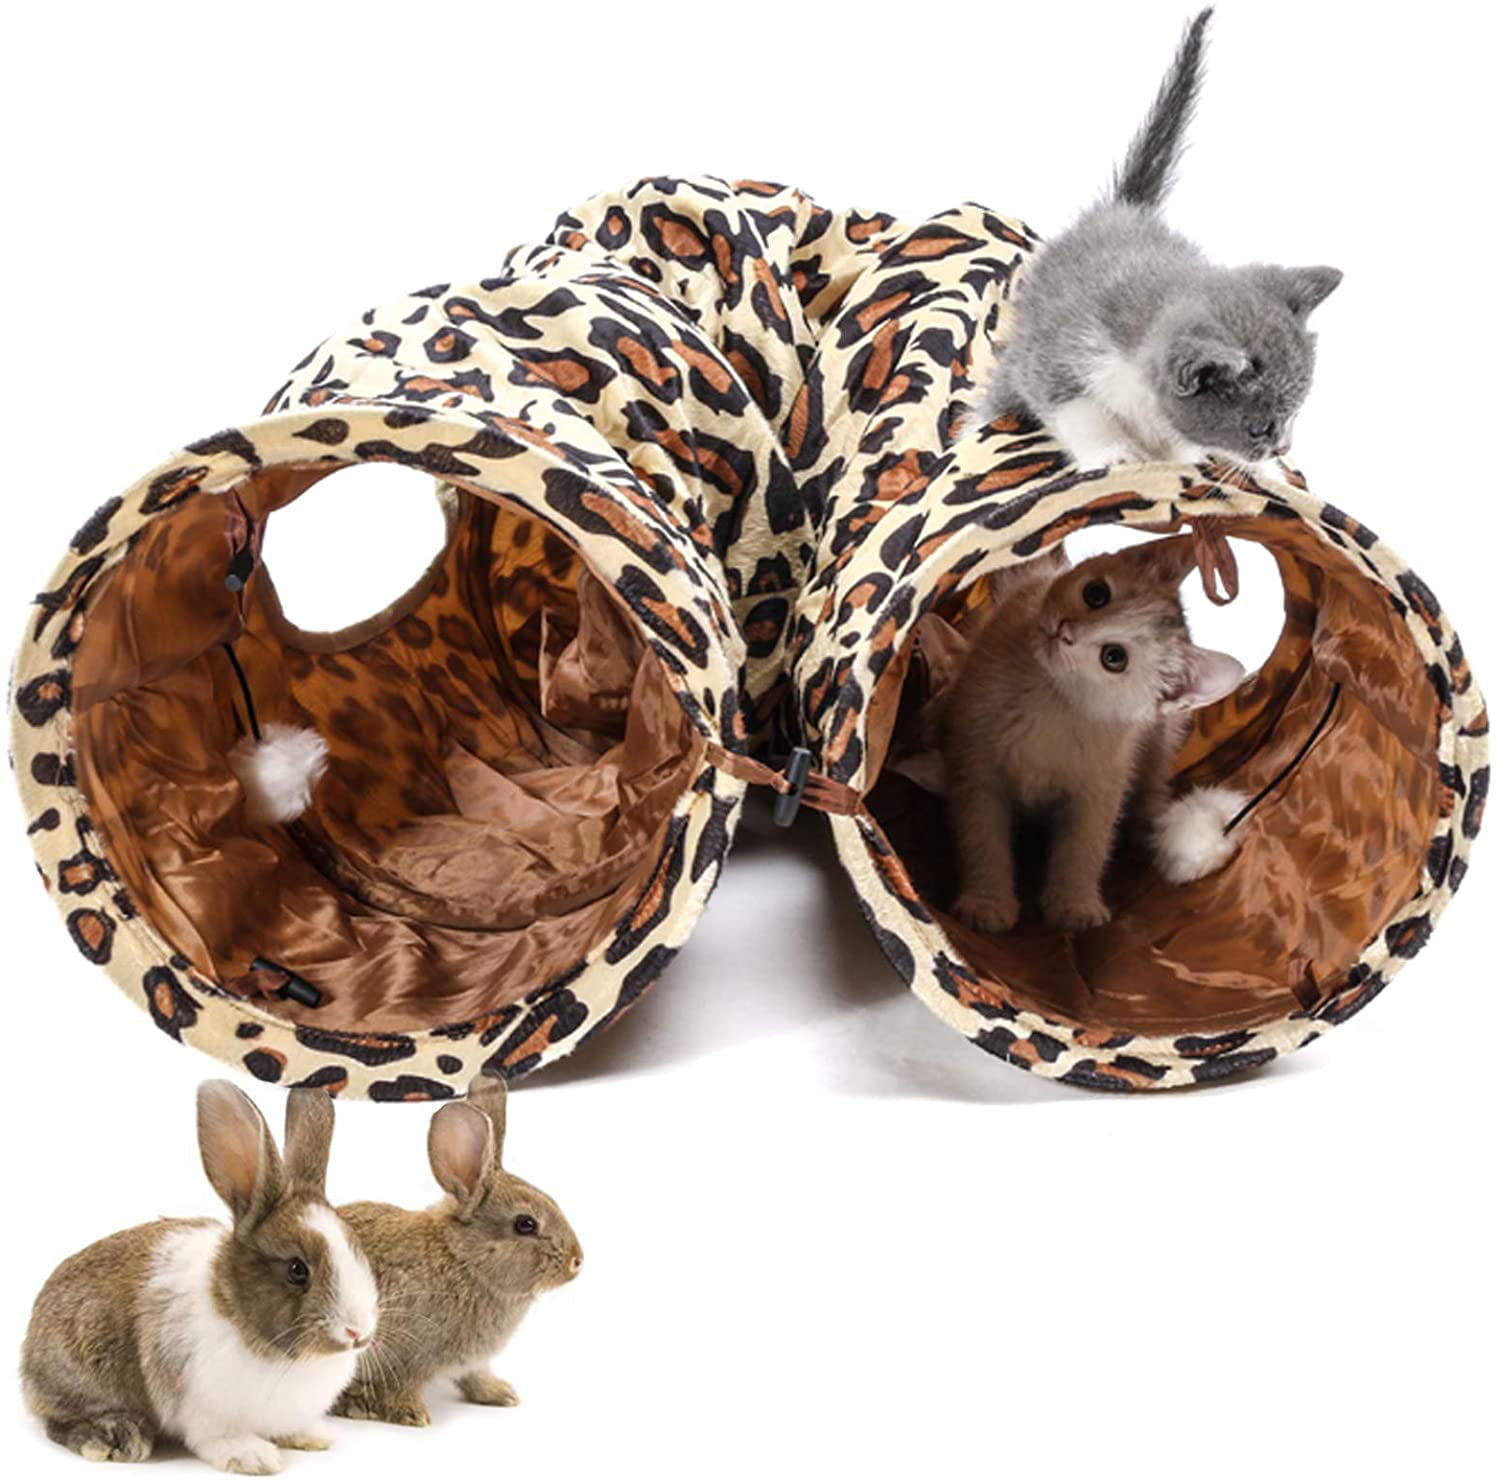 LeerKing Cat Tunnel Collapsible Cat Toys Play Tunnel Hideaway Pet Crinkle Tunnel Leopard Puppy Kitty Tunnel Pet Toys with Hole 